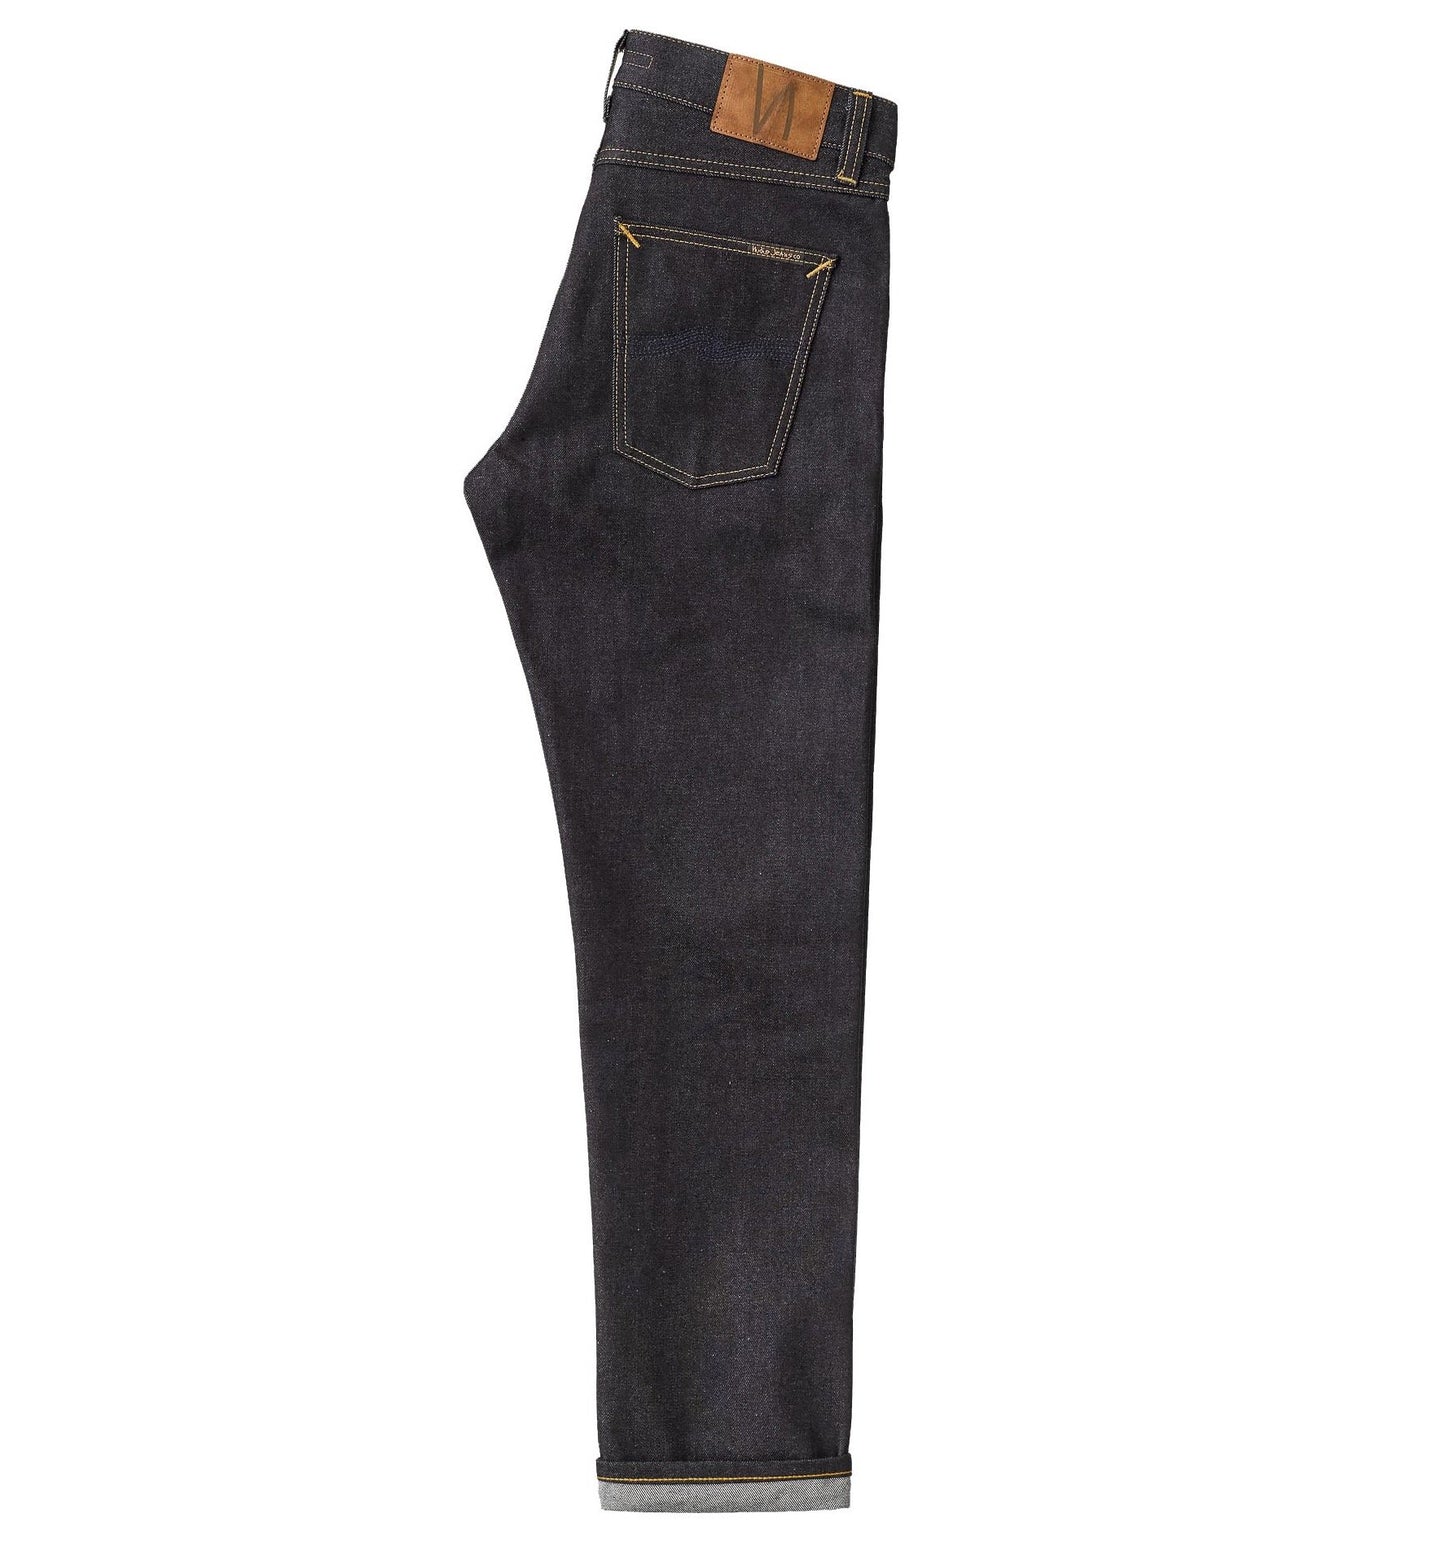 Nudie Jeans Gritty Jackson Selvage Jean